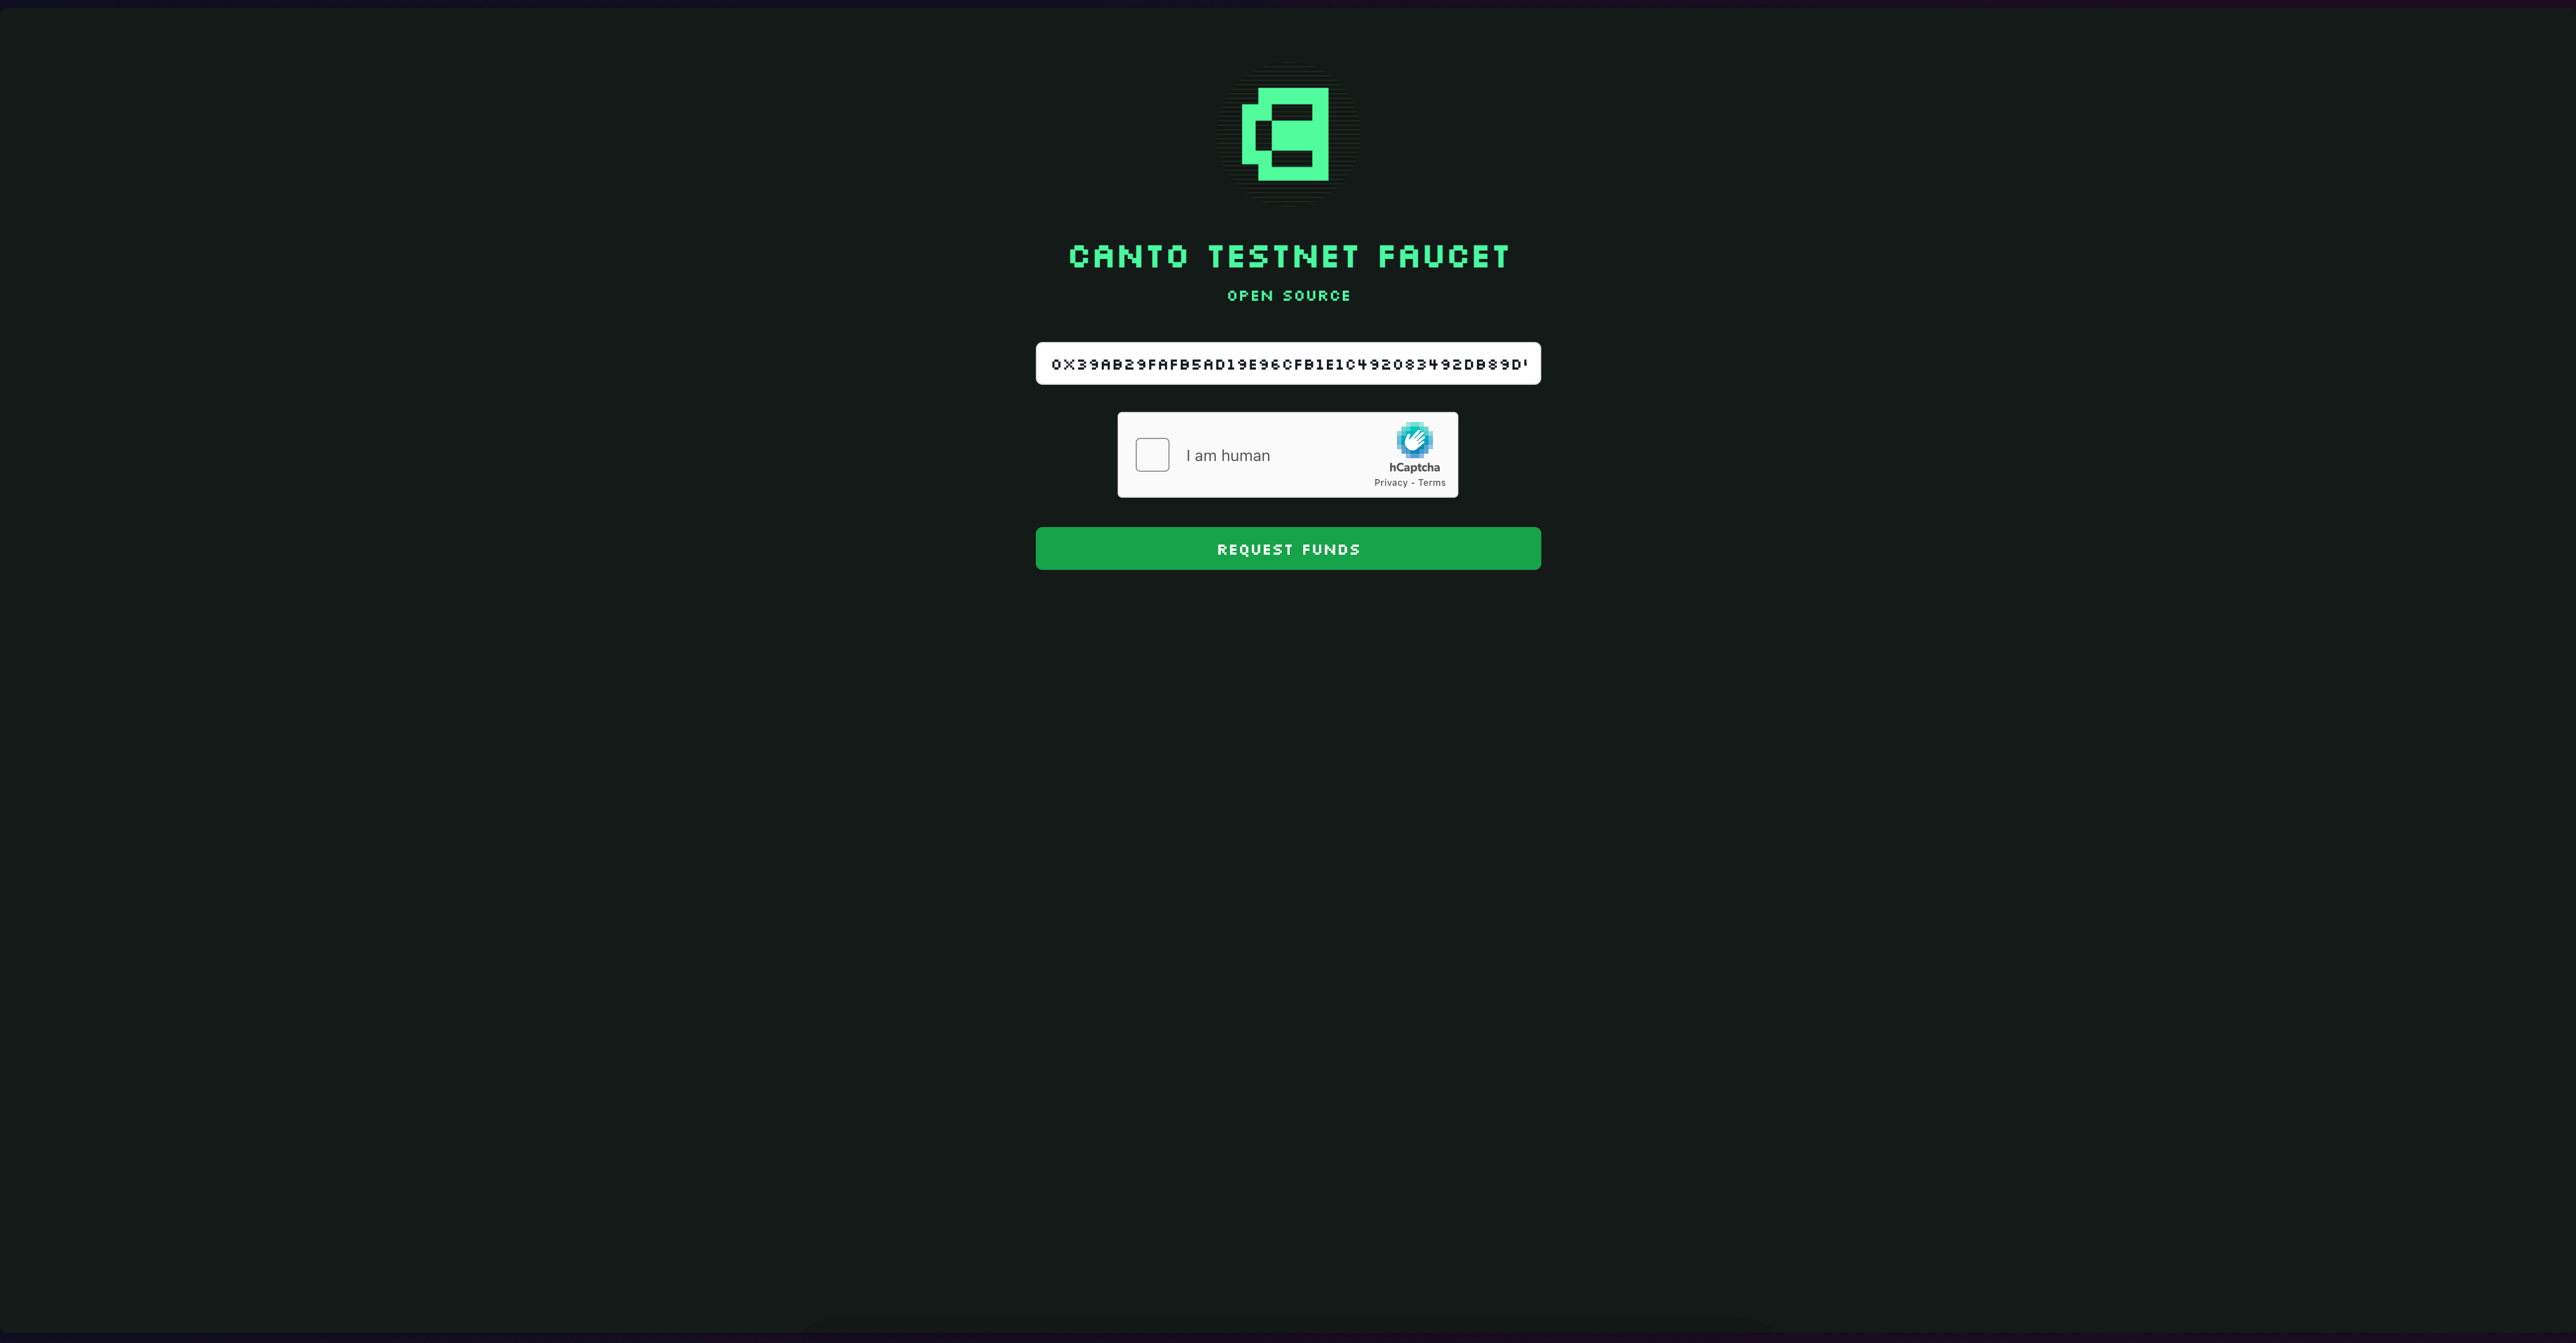 Go to canto testnet faucet and click on request funds